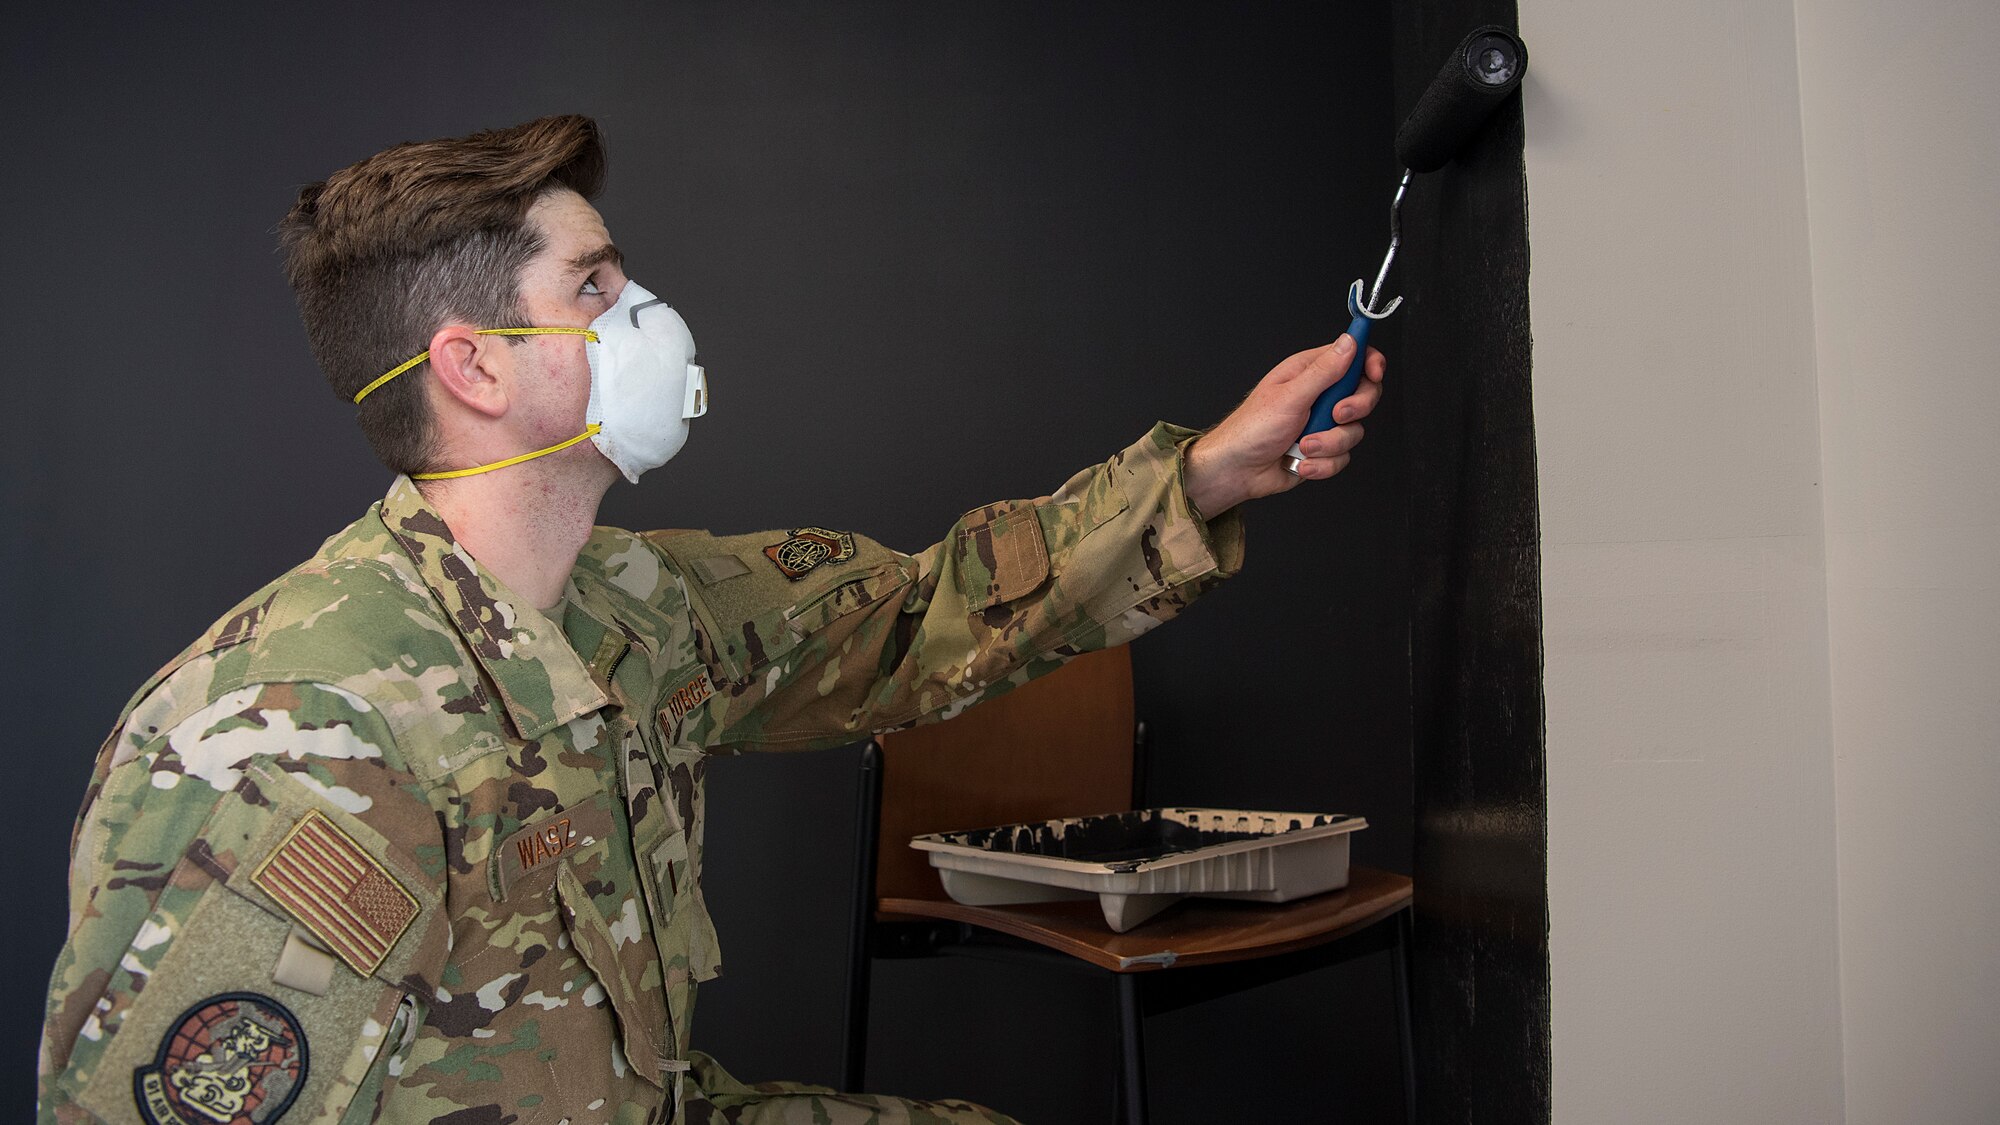 U.S. Air Force 2nd Lt. Charles Wasz, a 91st Air Refueling Squadron casual status pilot awaiting training, paints a wall in the 91st ARS heritage room at MacDill Air Force Base, Sept. 29, 2020.